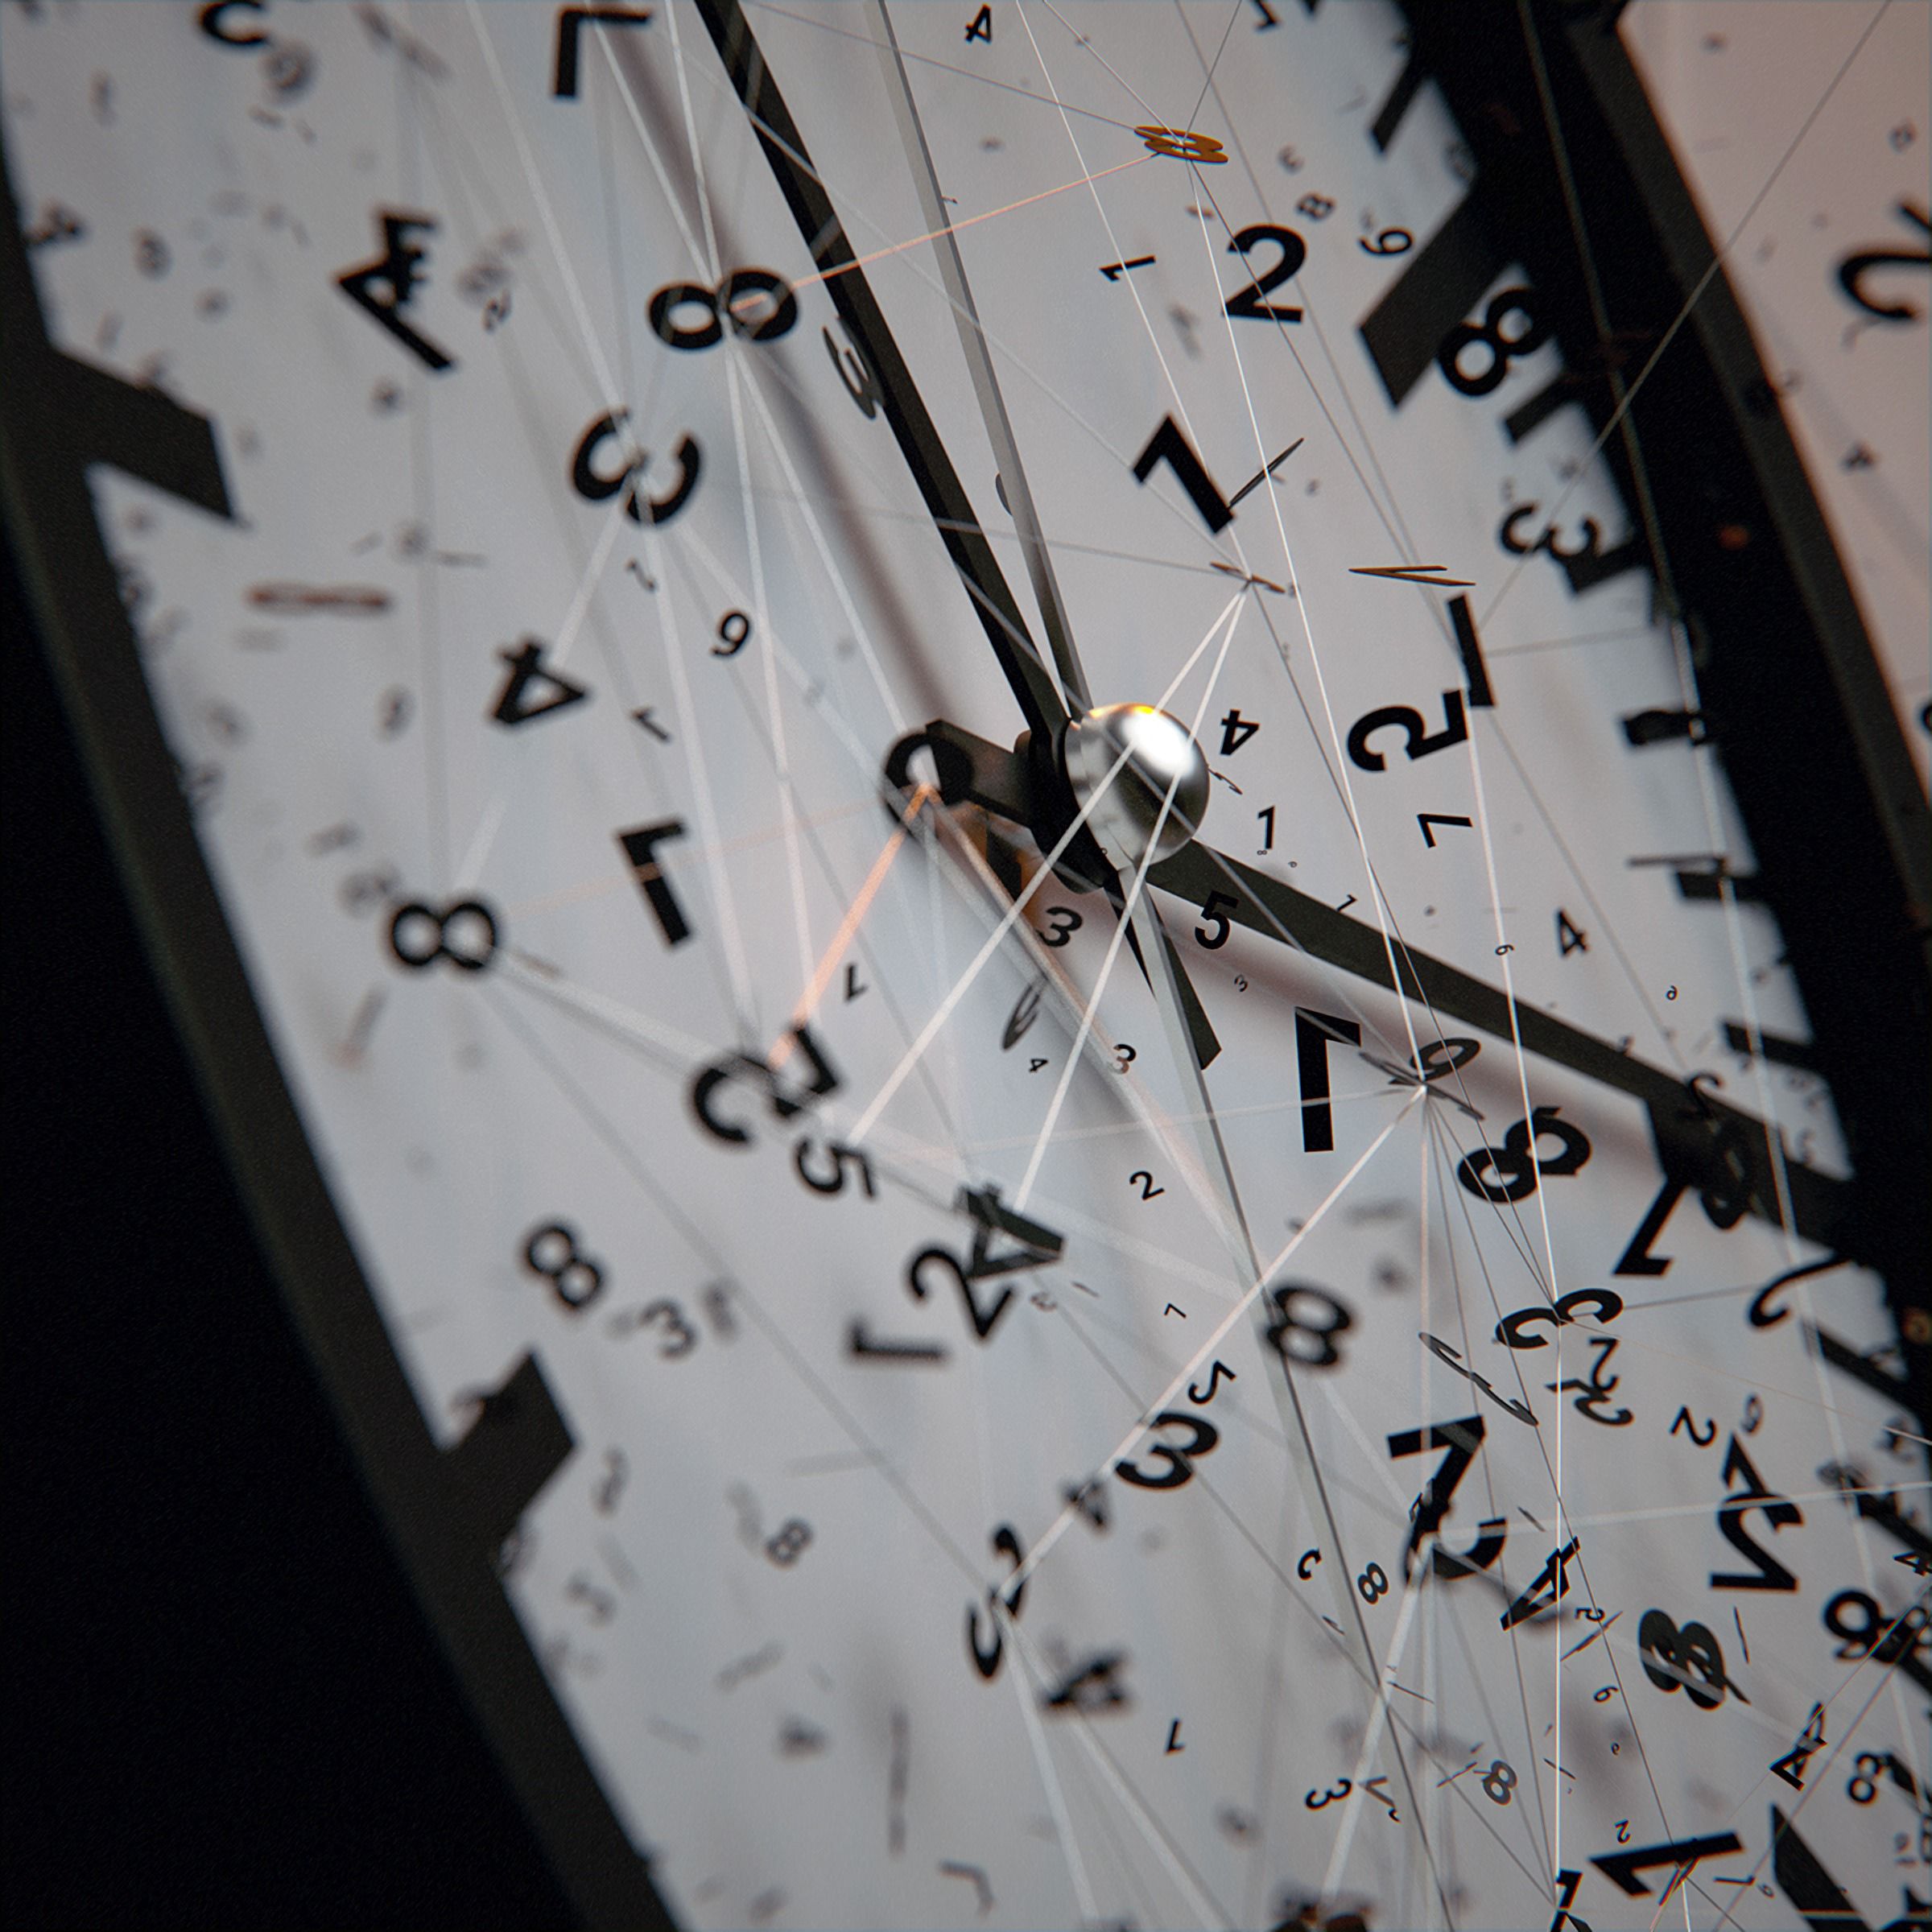 miscellanea, numbers, intricate, clock face, clock, dial, miscellaneous, lines, confused, arrows HD wallpaper